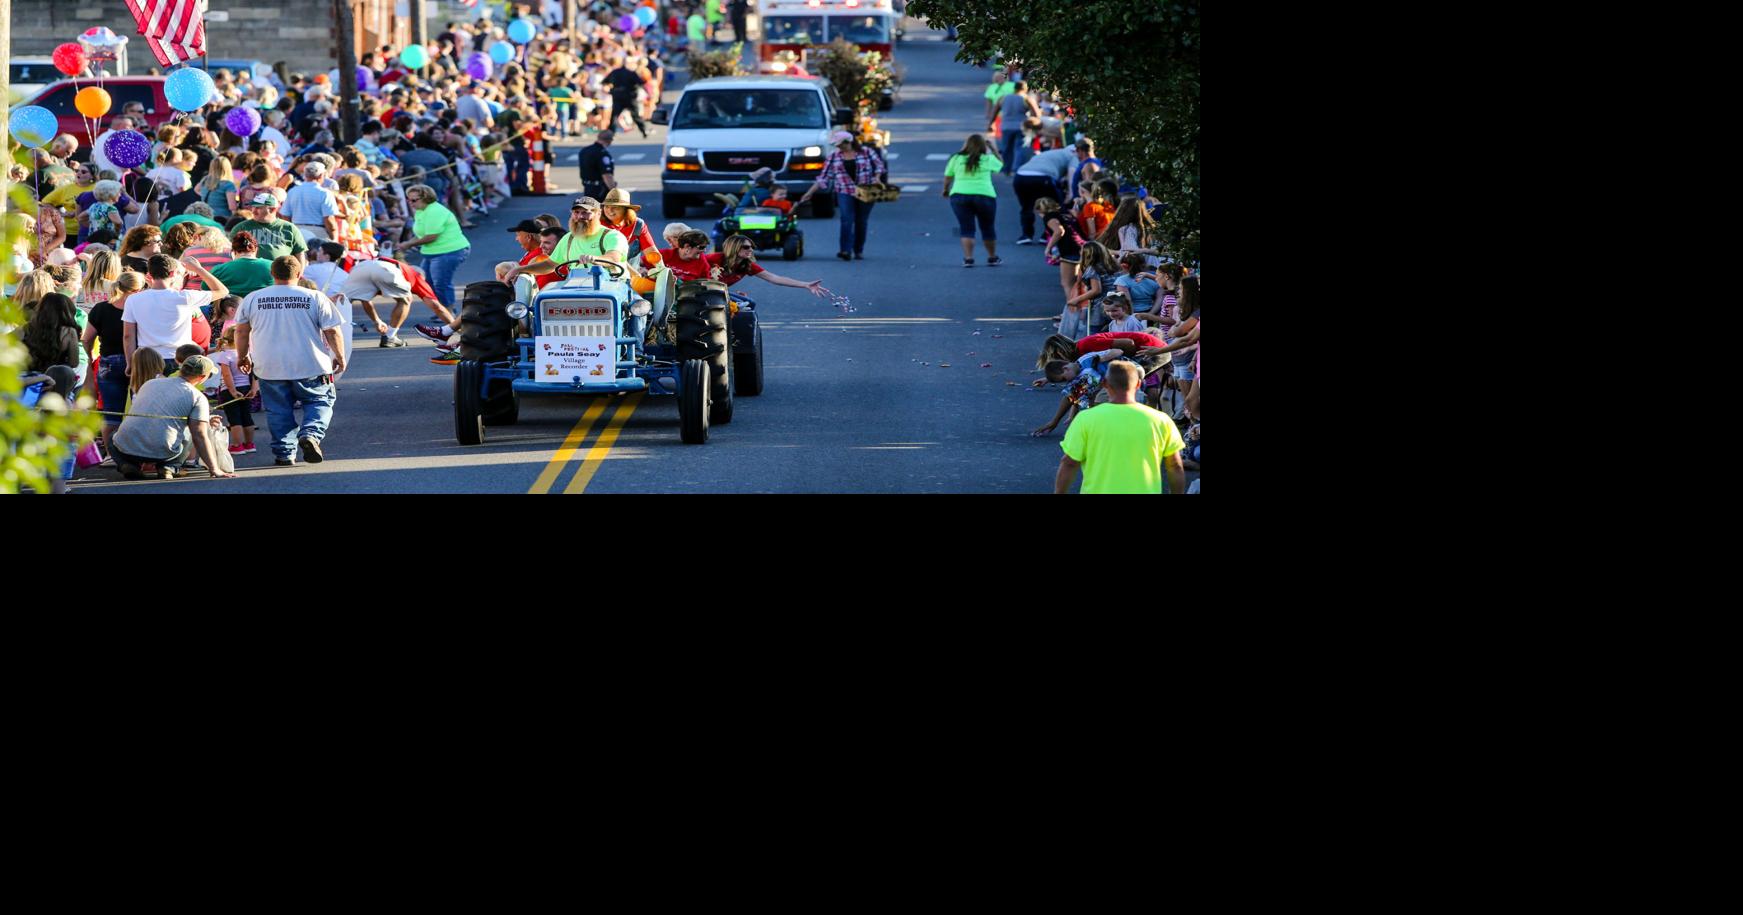 Photos Barboursville's Fall Fest Parade Photo Galleries herald